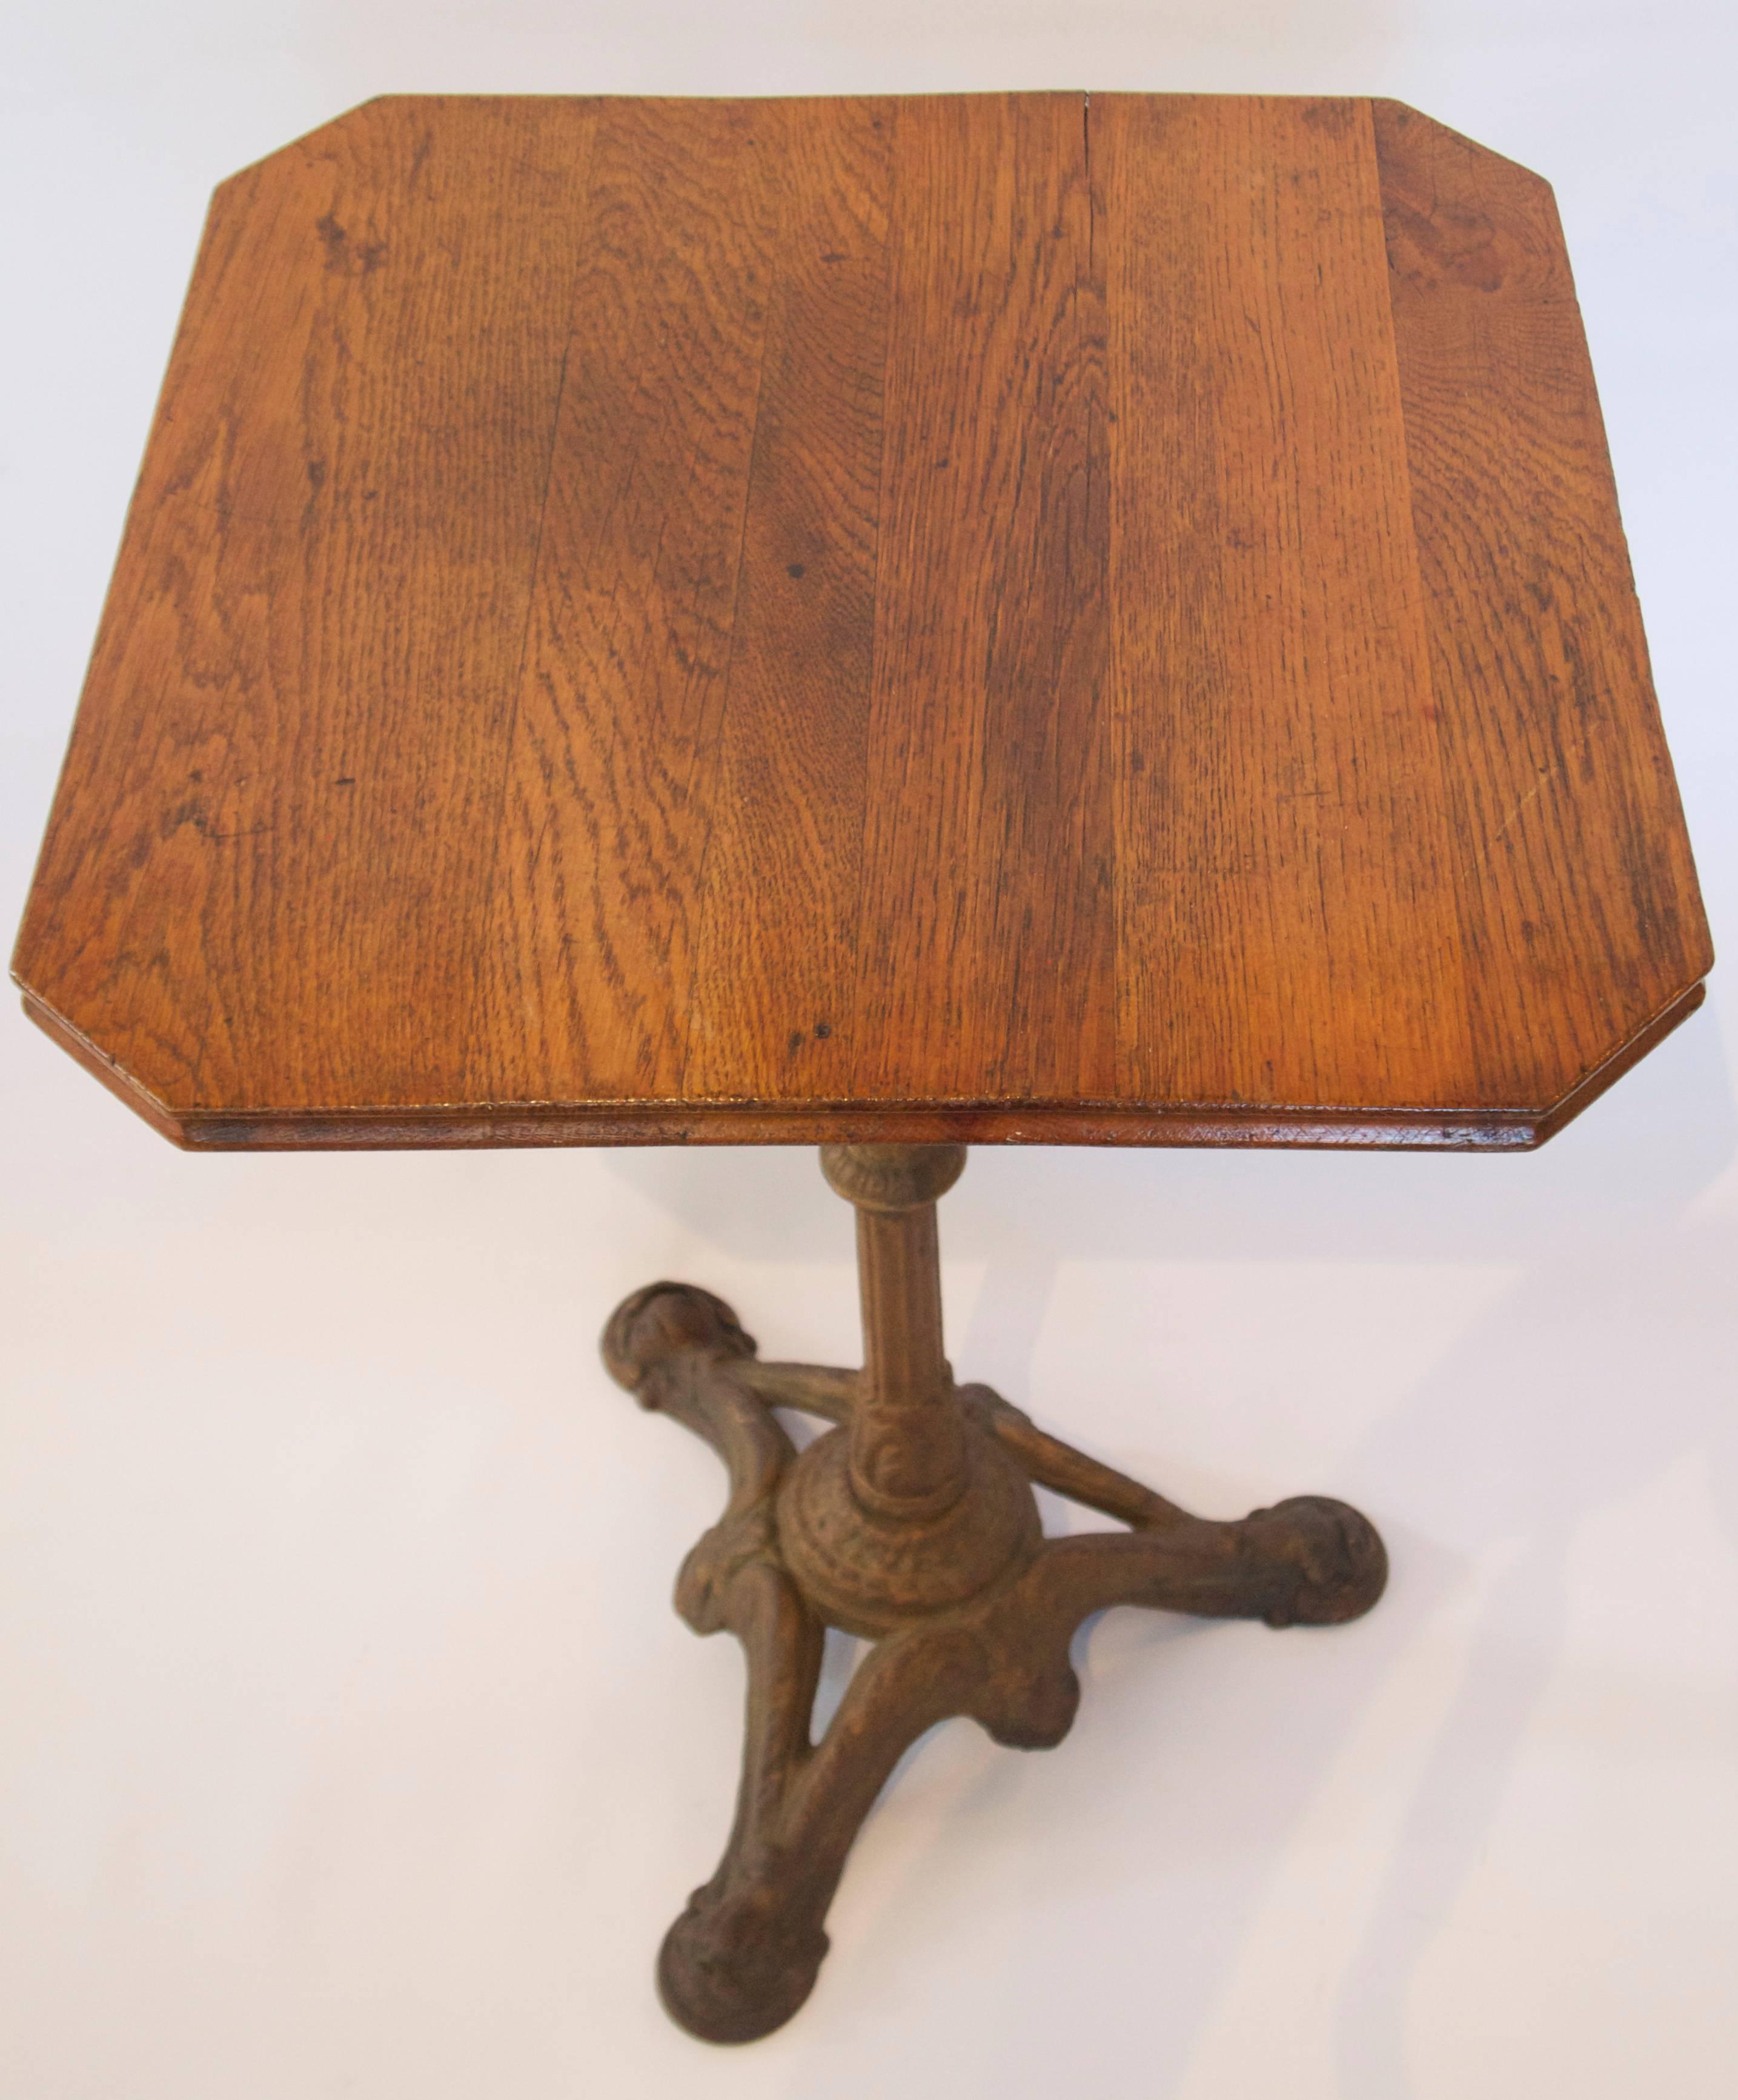 Square oak top bistro table of small size on a painted cast iron tripod pedestal base.
Early 20th century,
France.